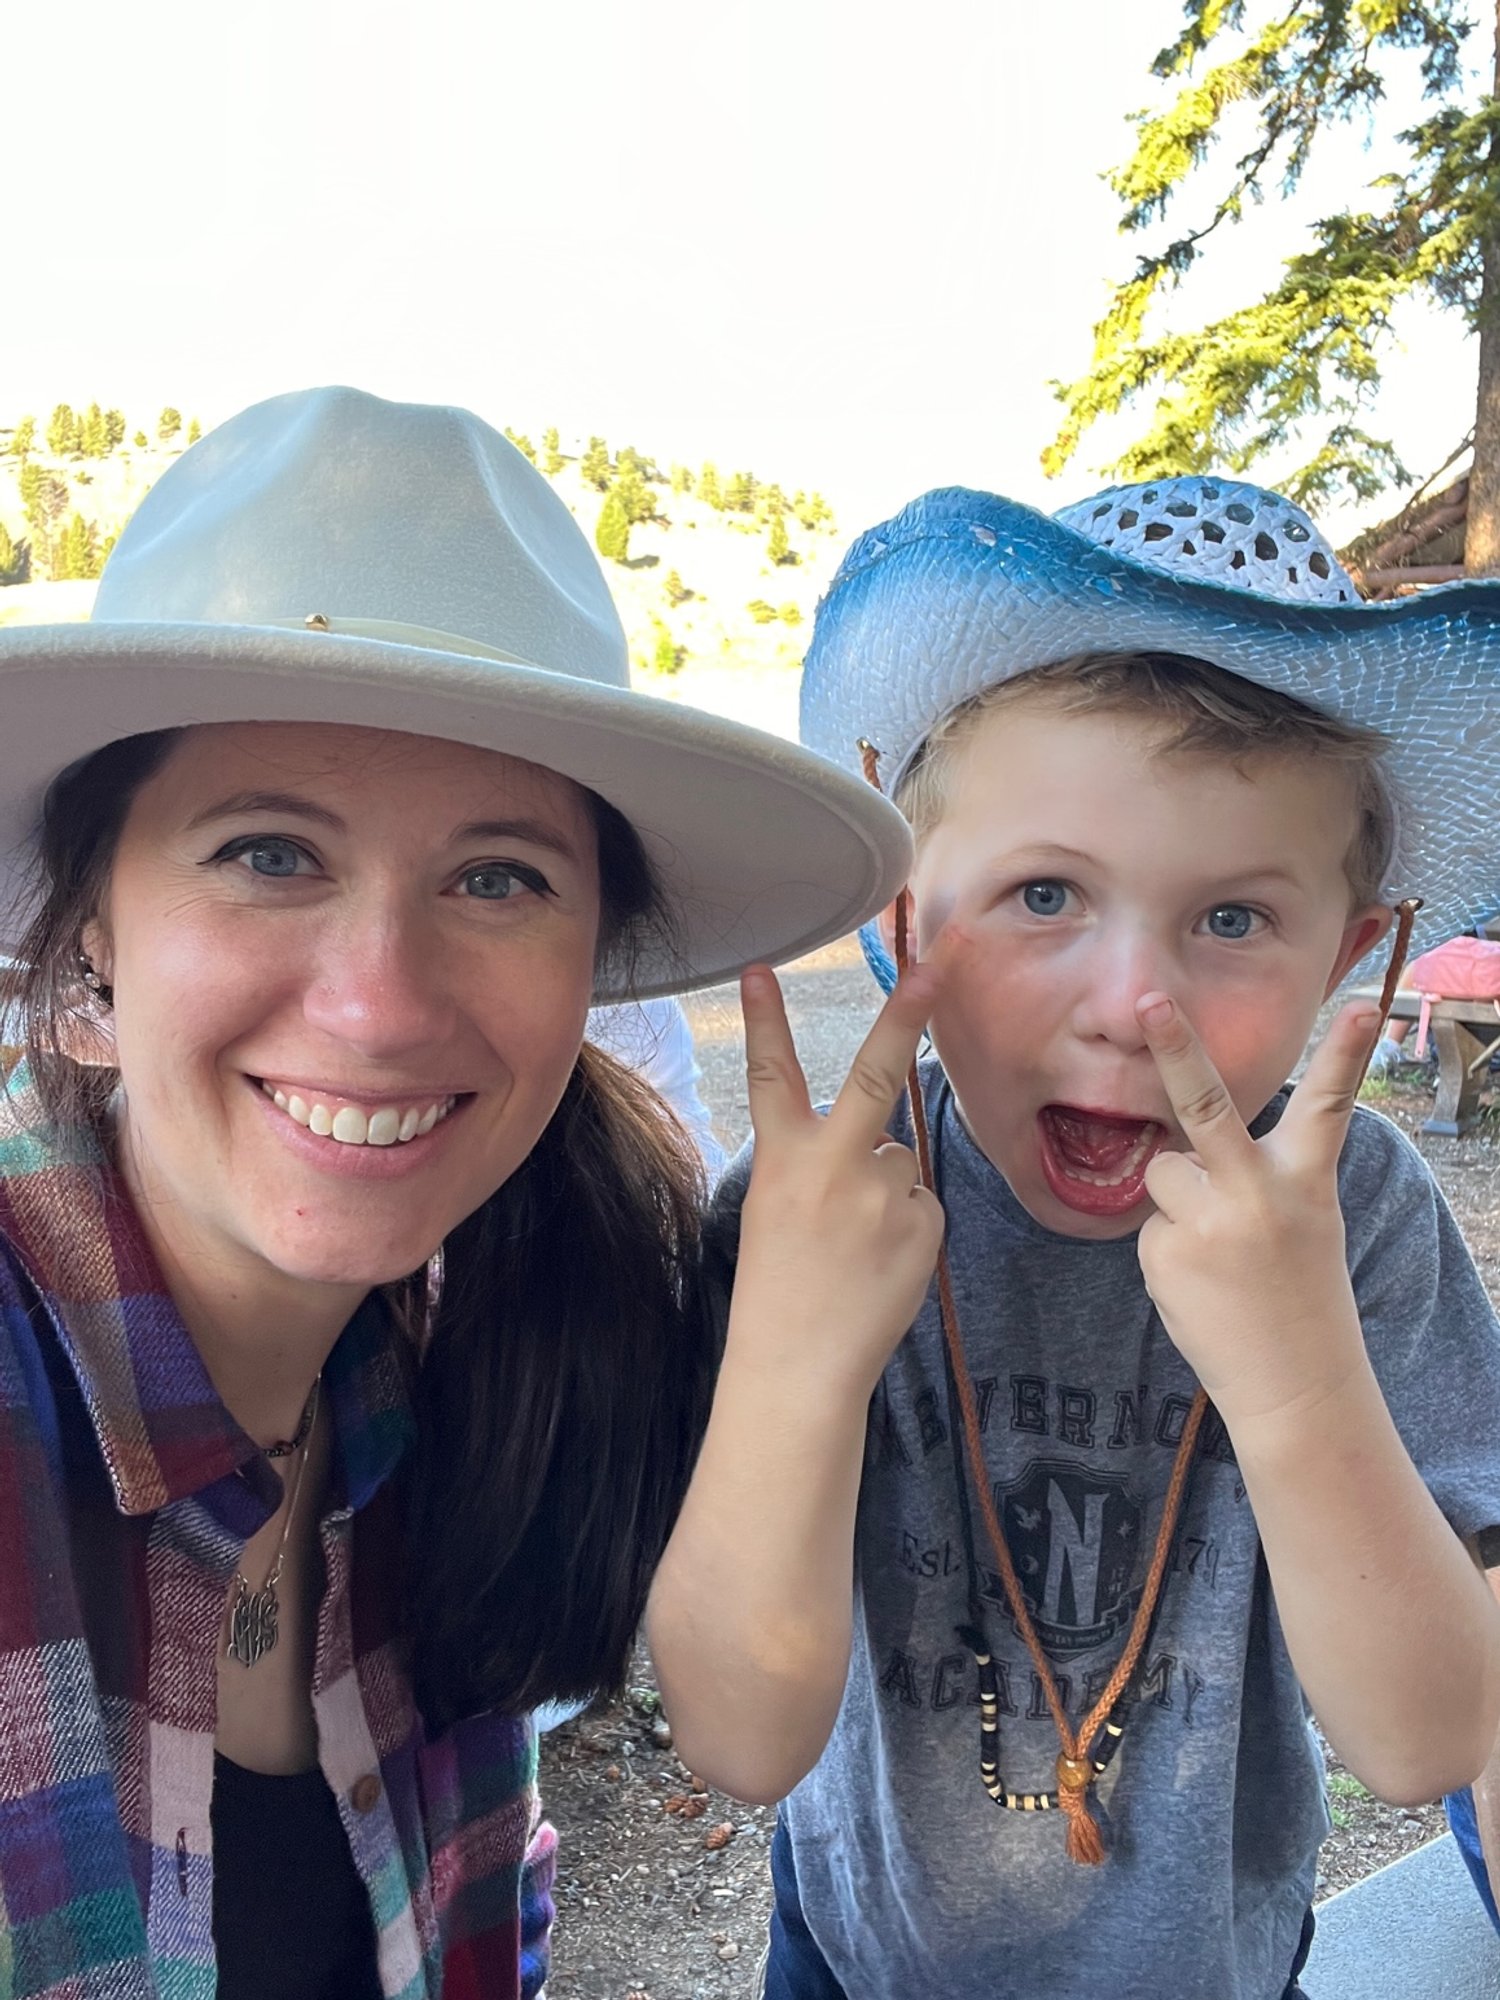 yellowstone-old-west-dinner-cookout-review-hats.JPG